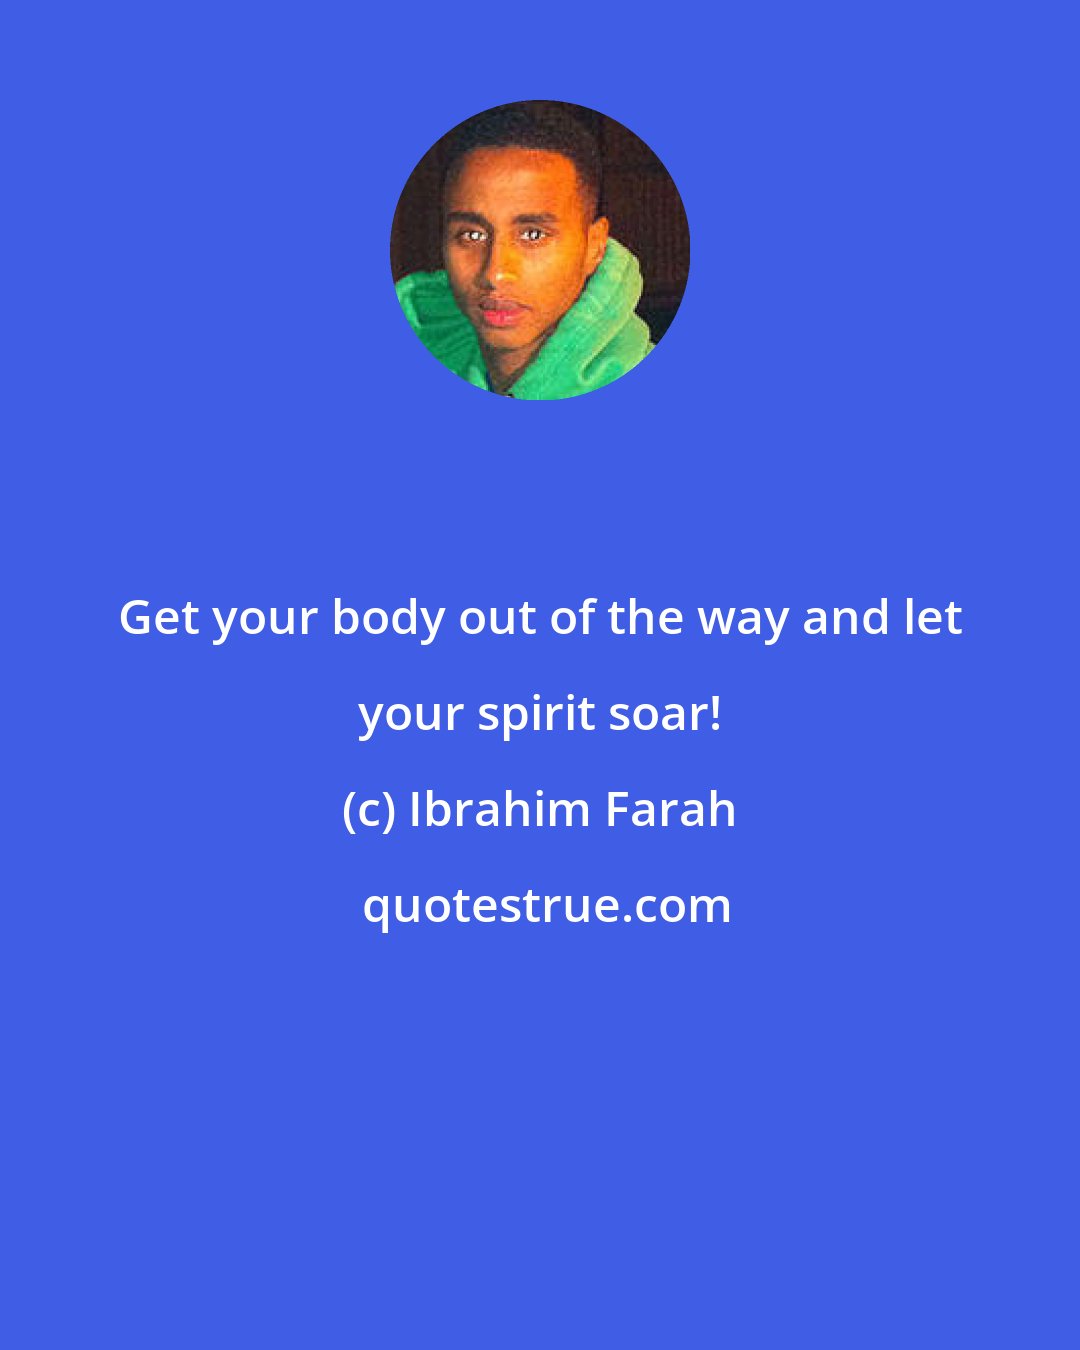 Ibrahim Farah: Get your body out of the way and let your spirit soar!